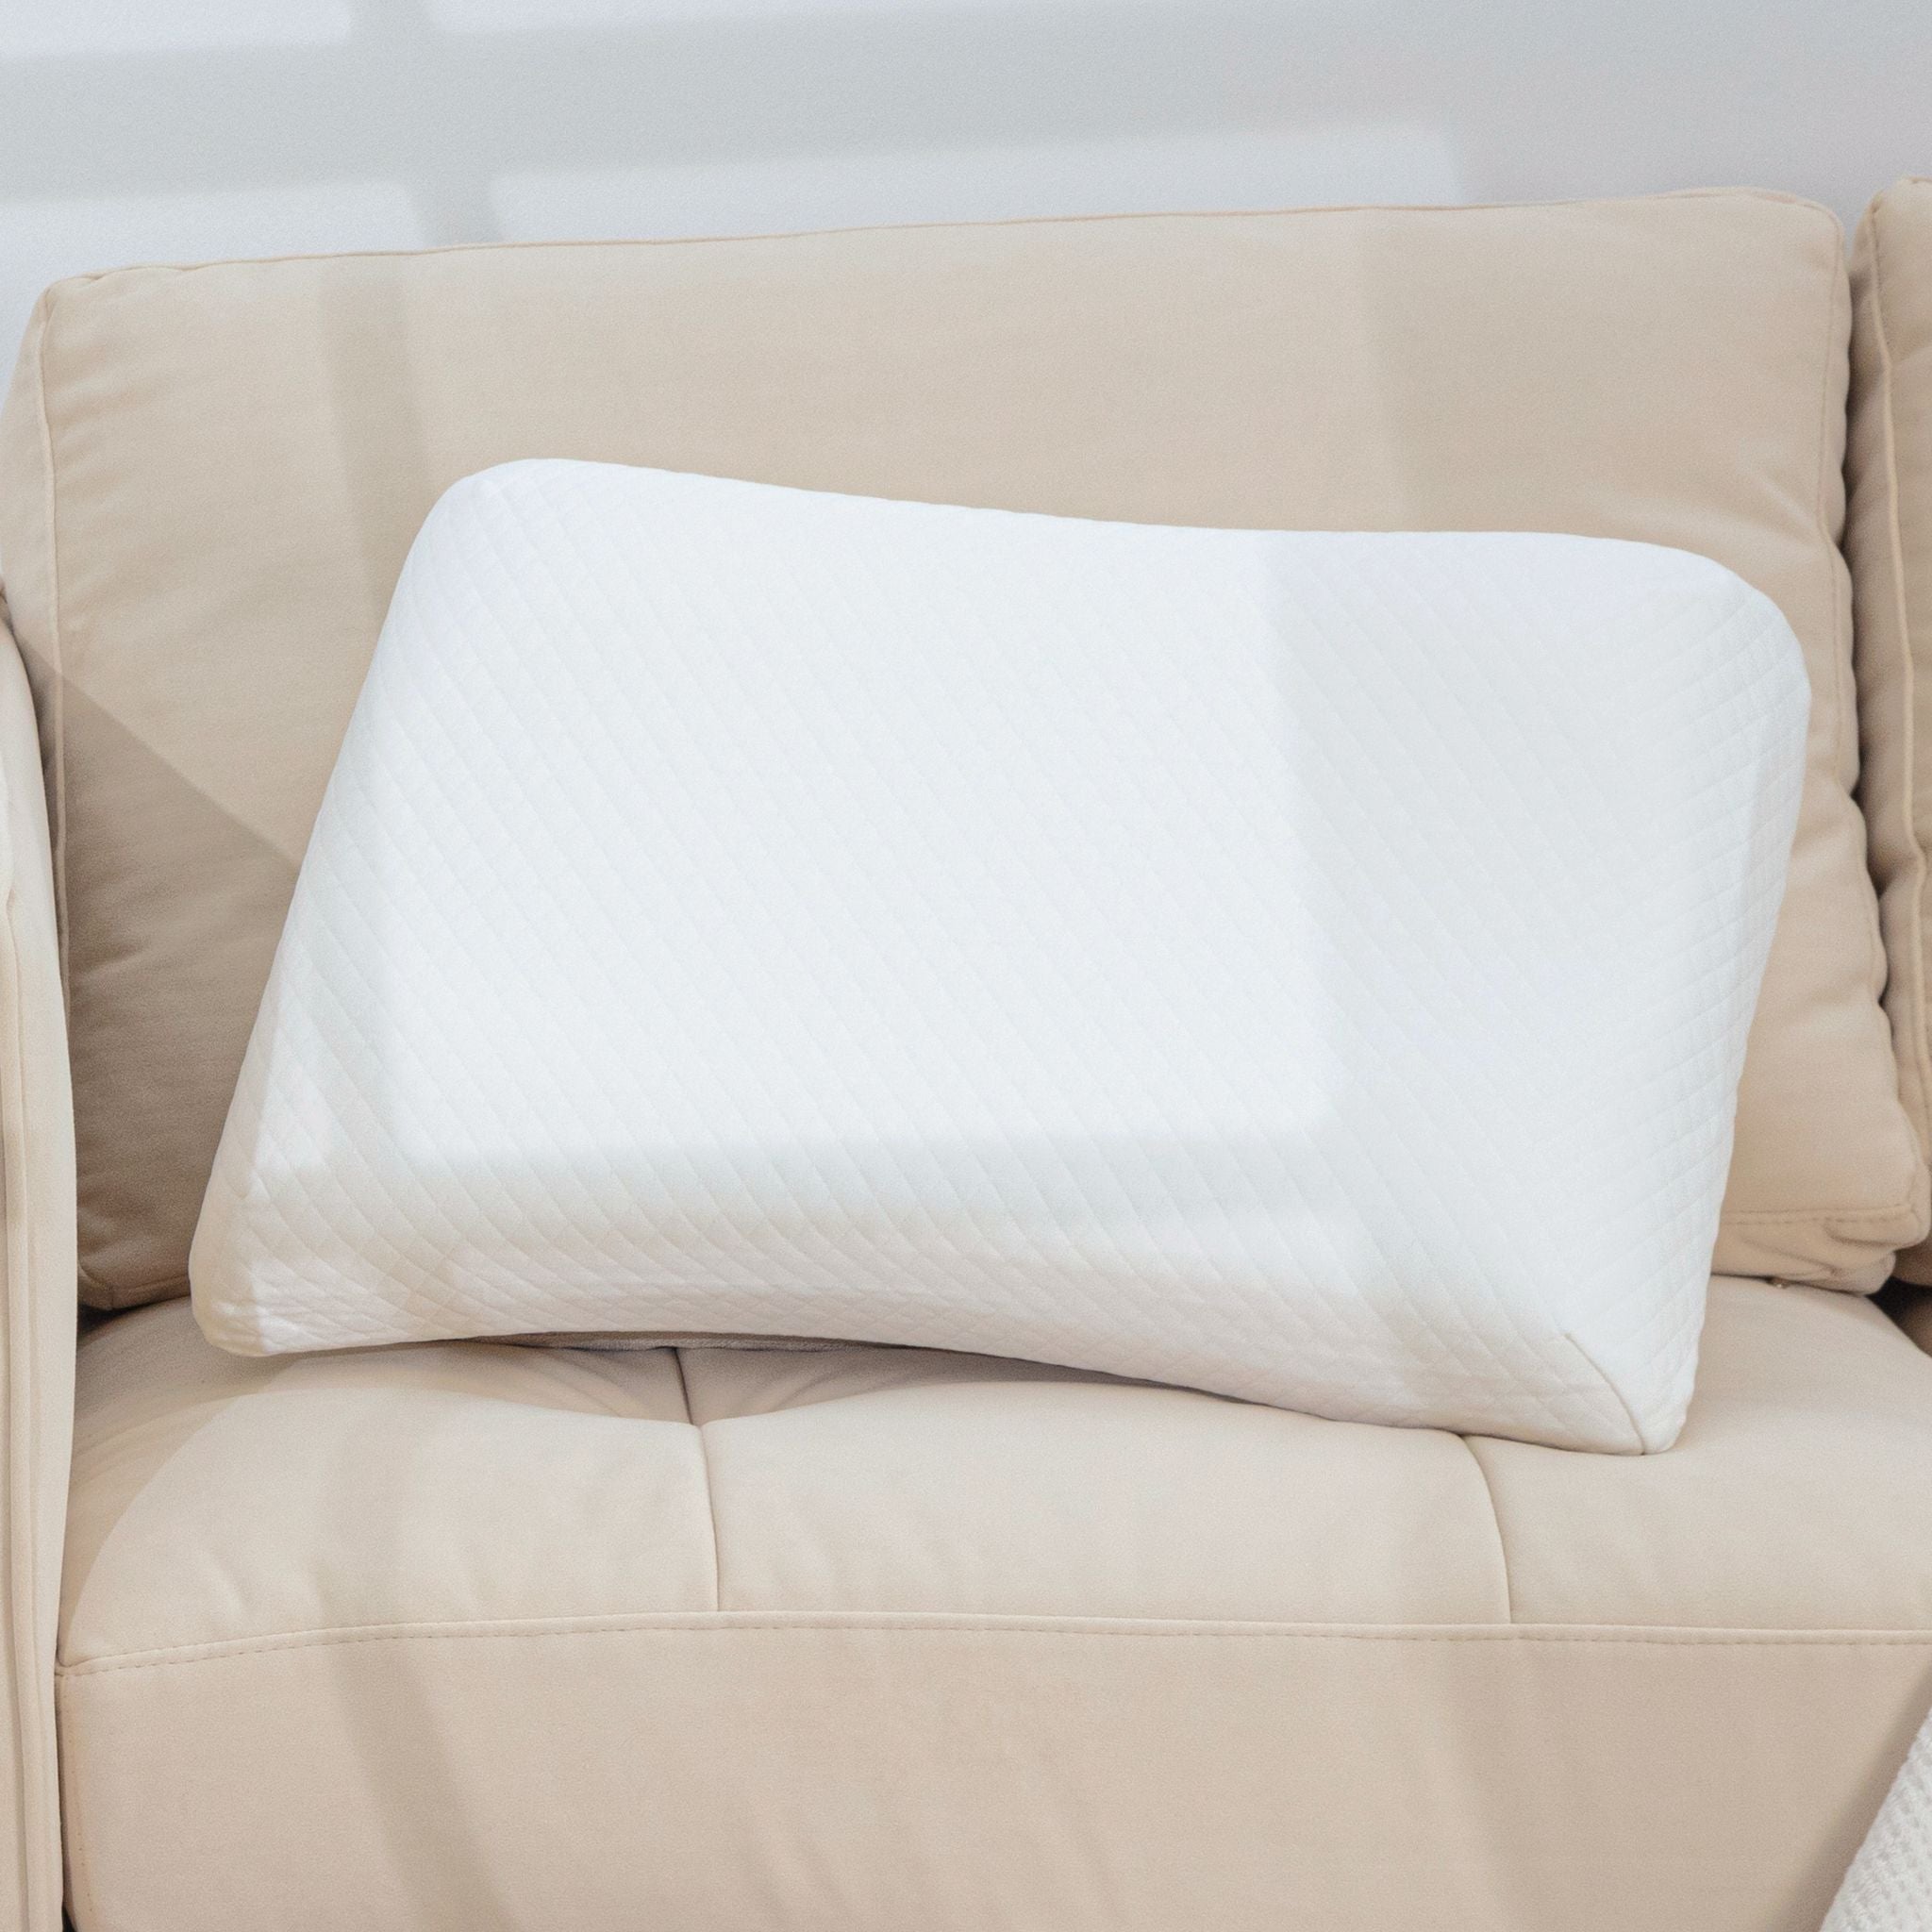 Curved Back Cushion, Memory Foam Support Pillows